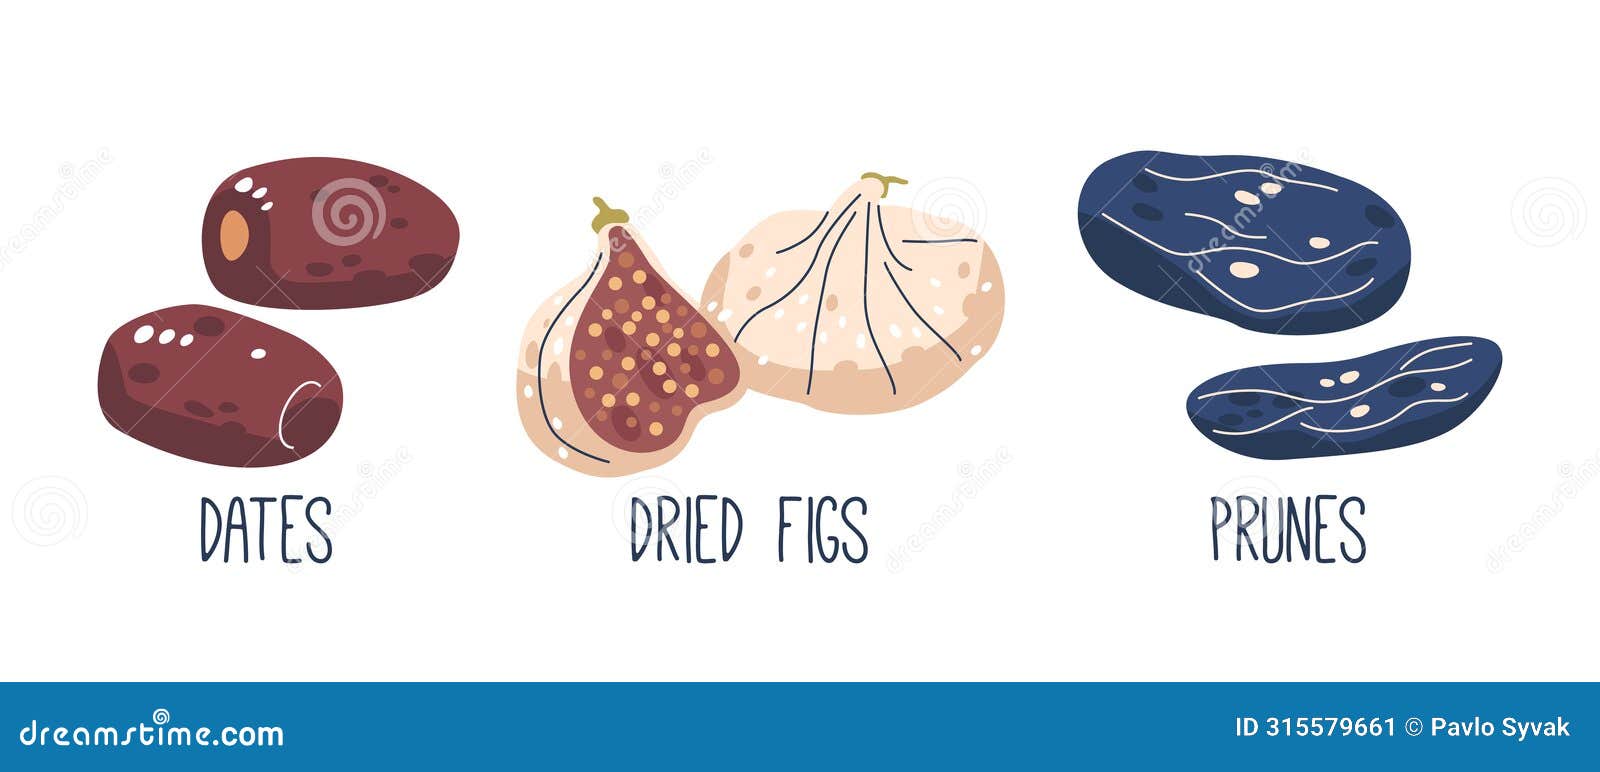  dried dates are sweet and chewy with a caramel-like taste. figs offer a rich, earthy sweetness and robust flavor